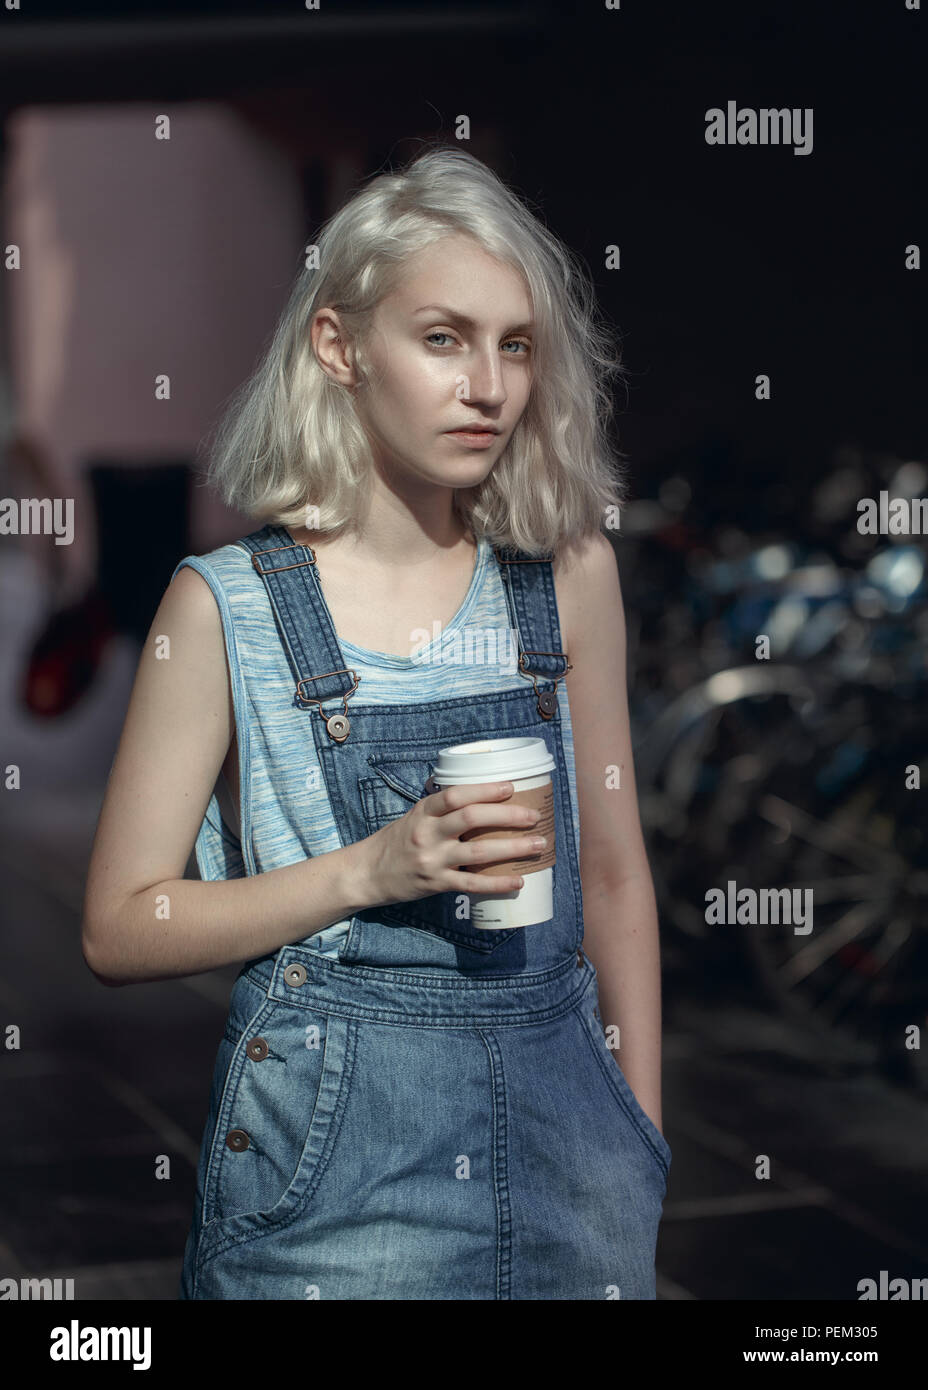 Portrait of beautiful Caucasian teenage young blonde alternative model girl woman in blue tshirt, jeans romper looking in camera holding cup of coffee Stock Photo